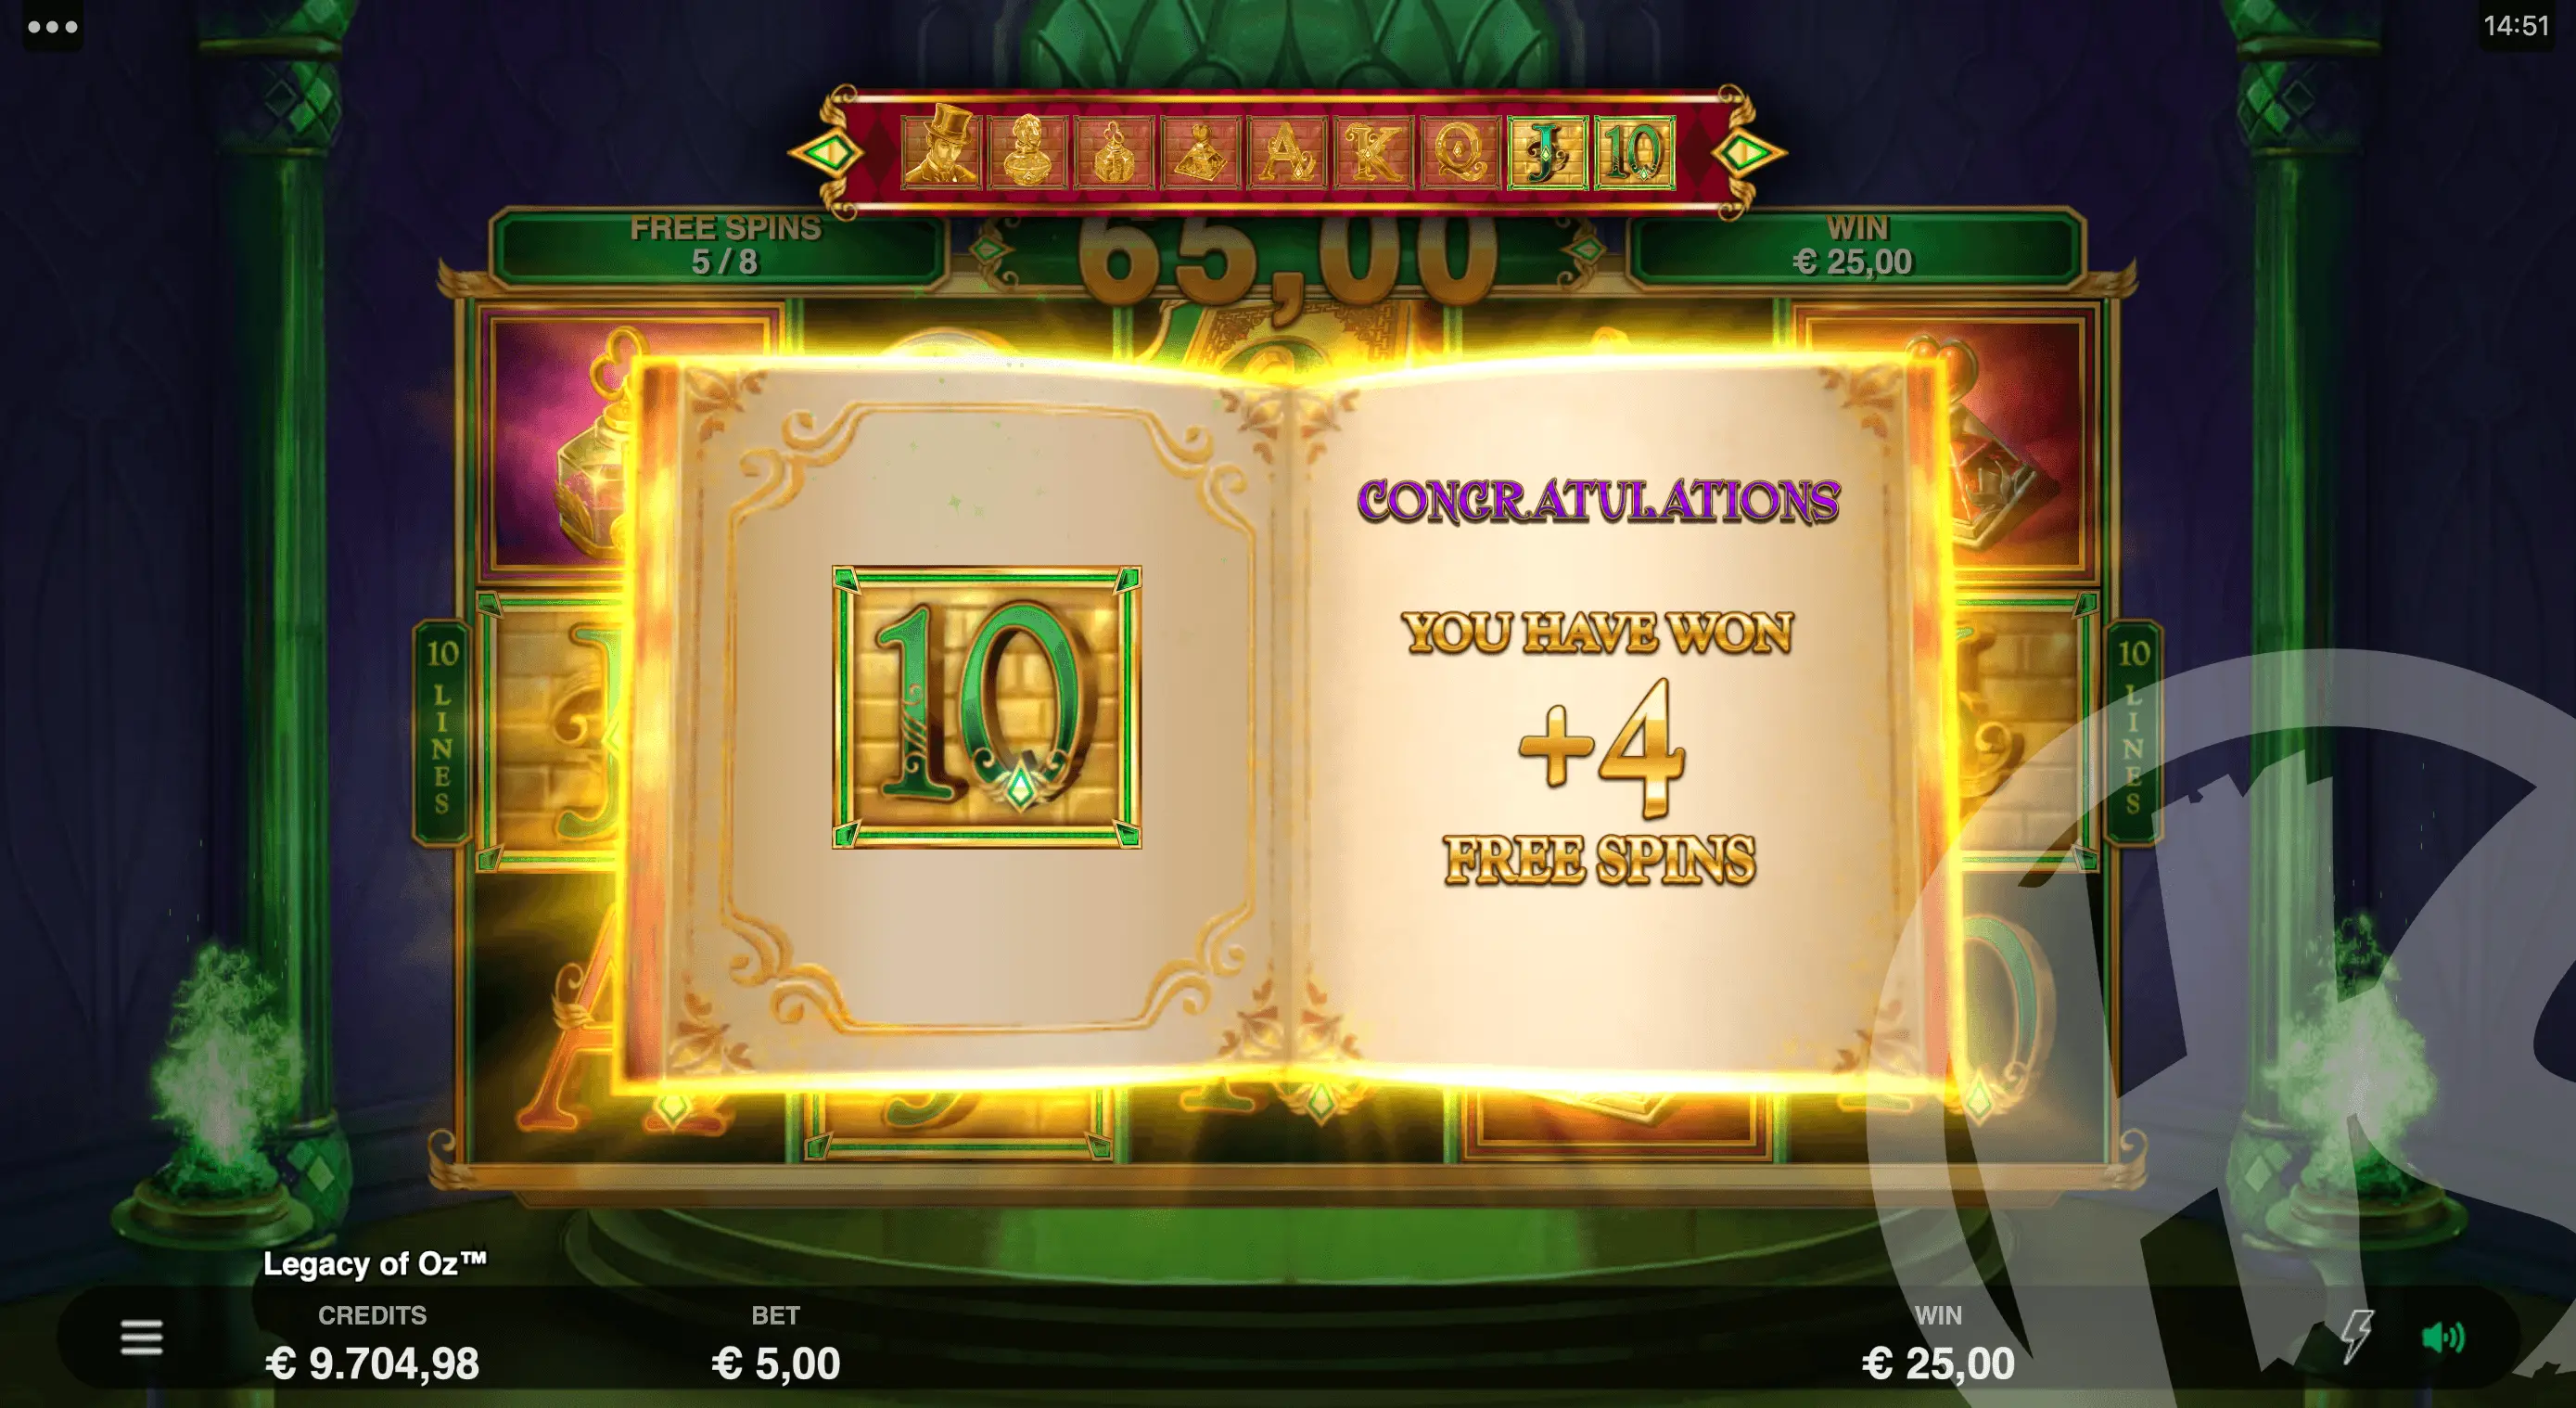 2 Scatters Retrigger Free Spins